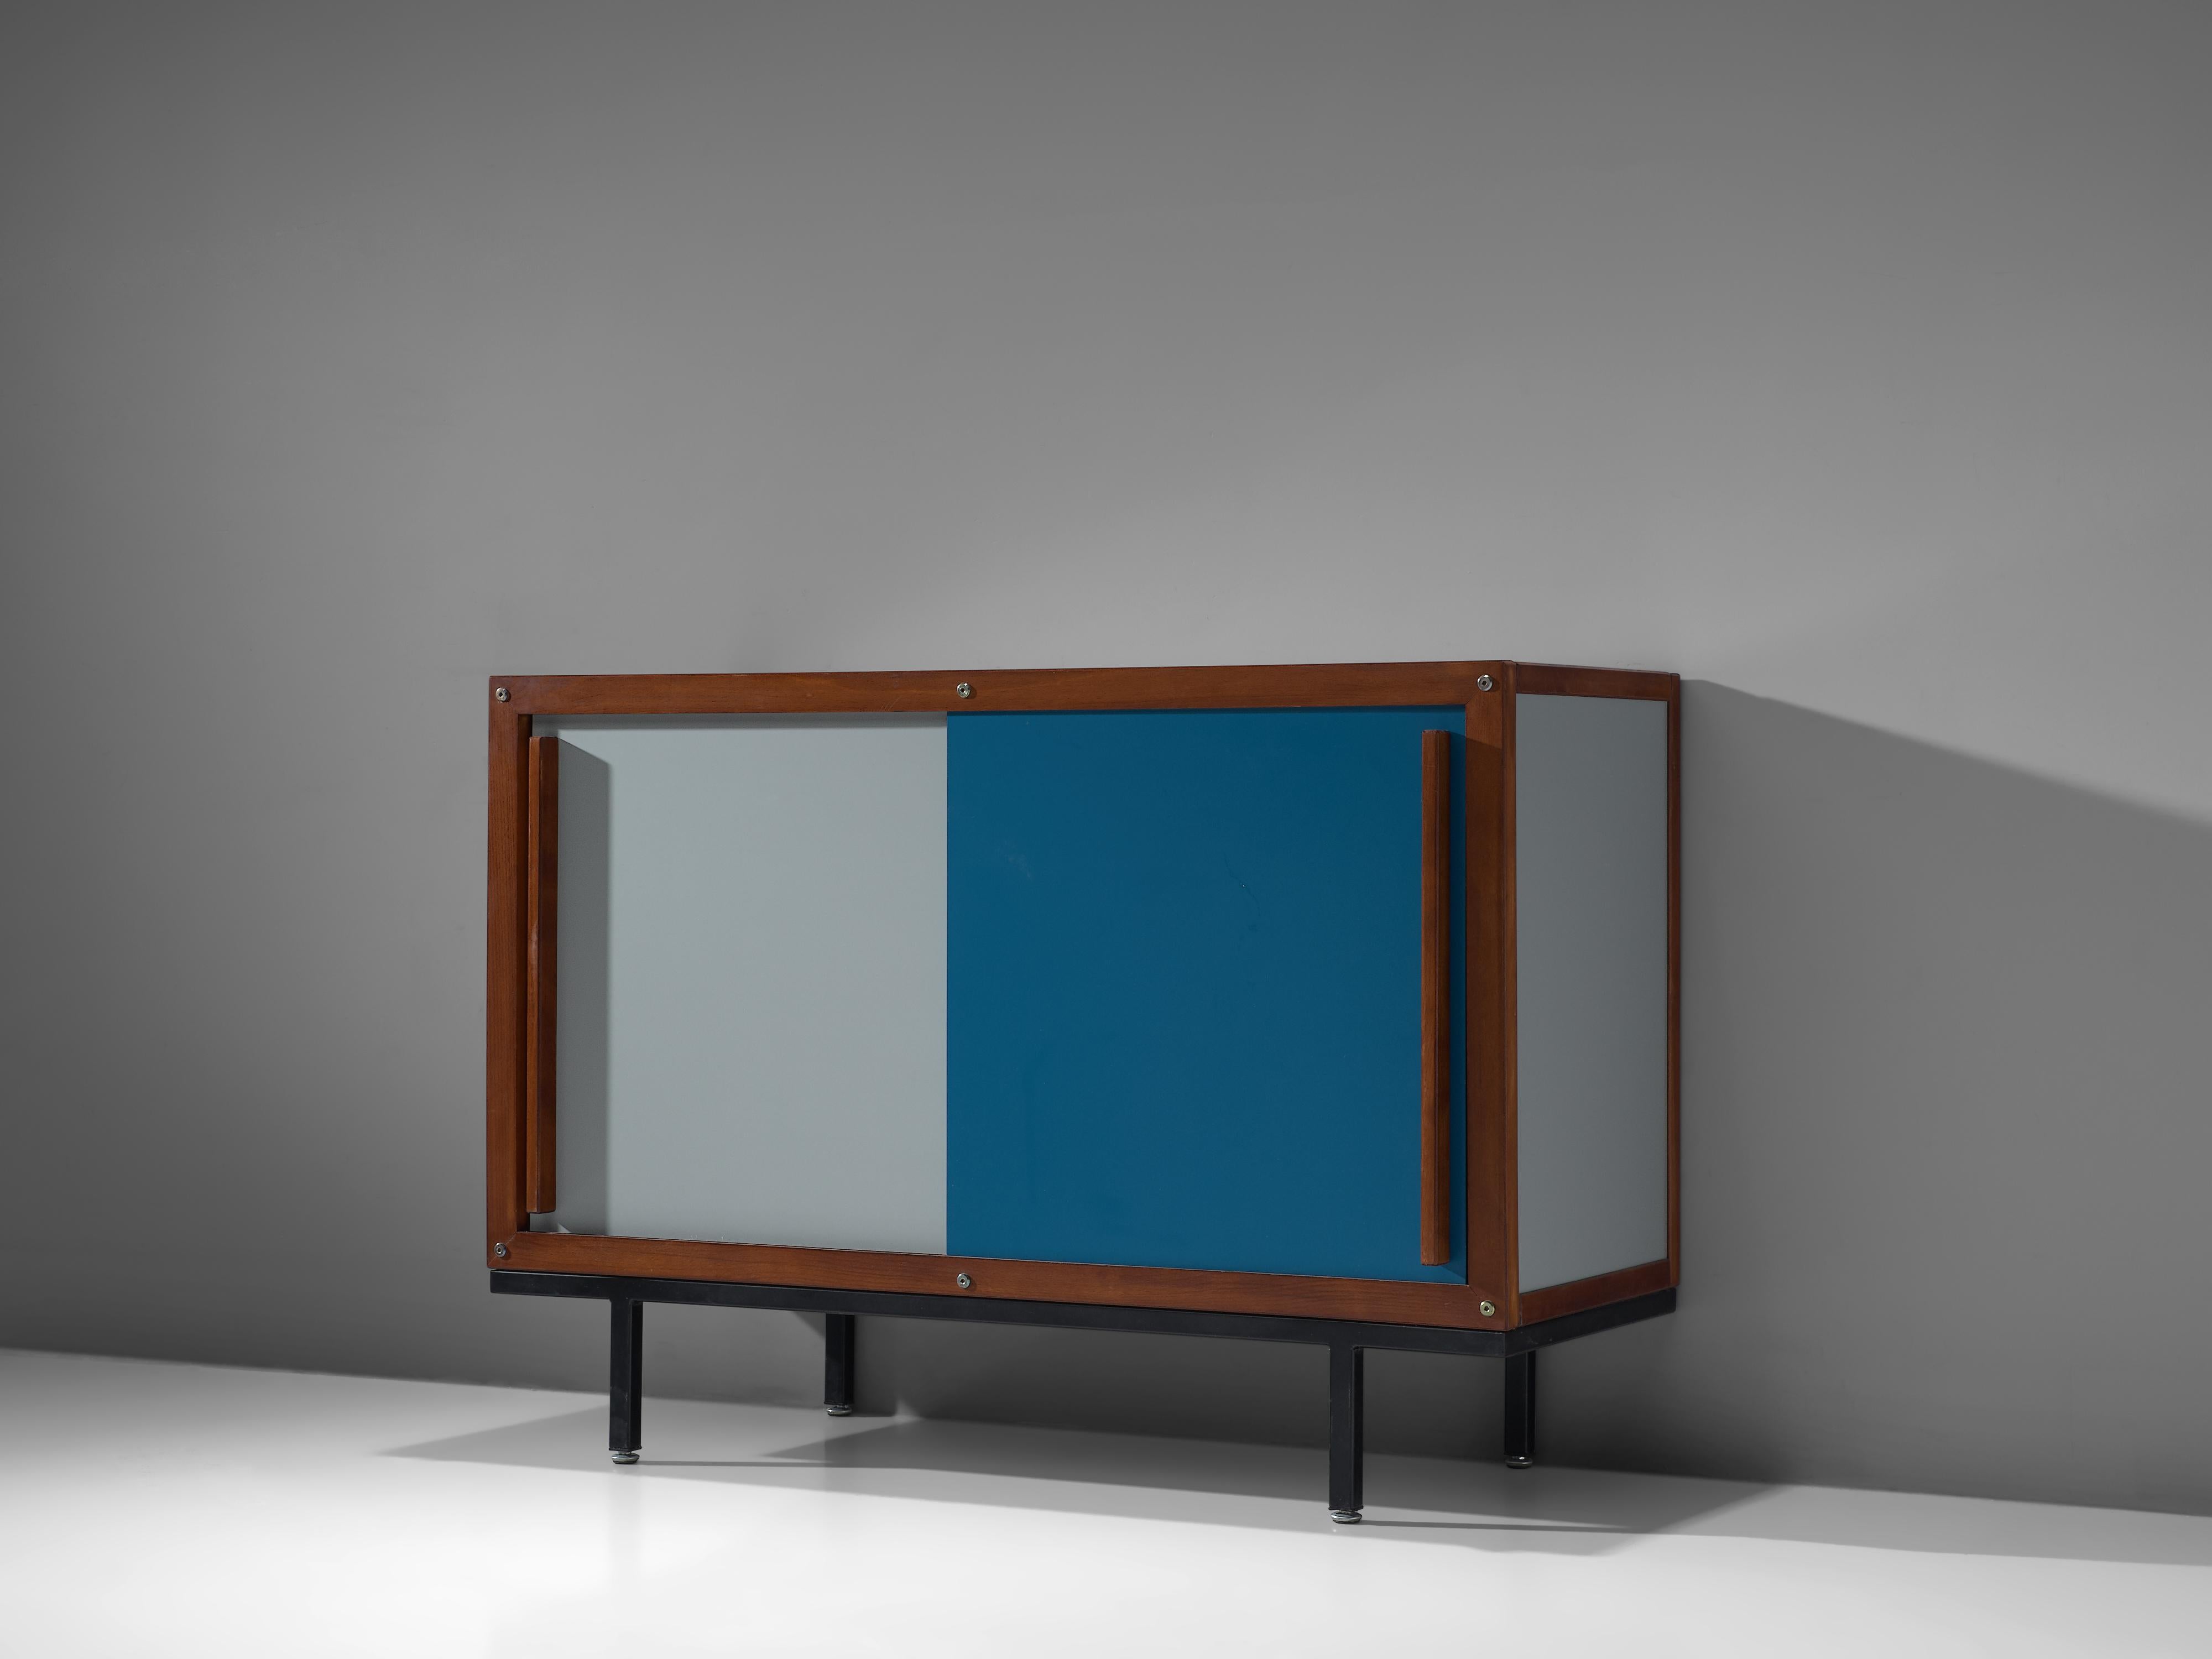 Andre Sornay, sideboard, oak, metal, France, 1960s.

This sideboard is designed by the French cabinetmaker Andre Sornay. The sideboard is executed in blue and gray sliding doors that are framed with oak. This cabinet is solid and executed to